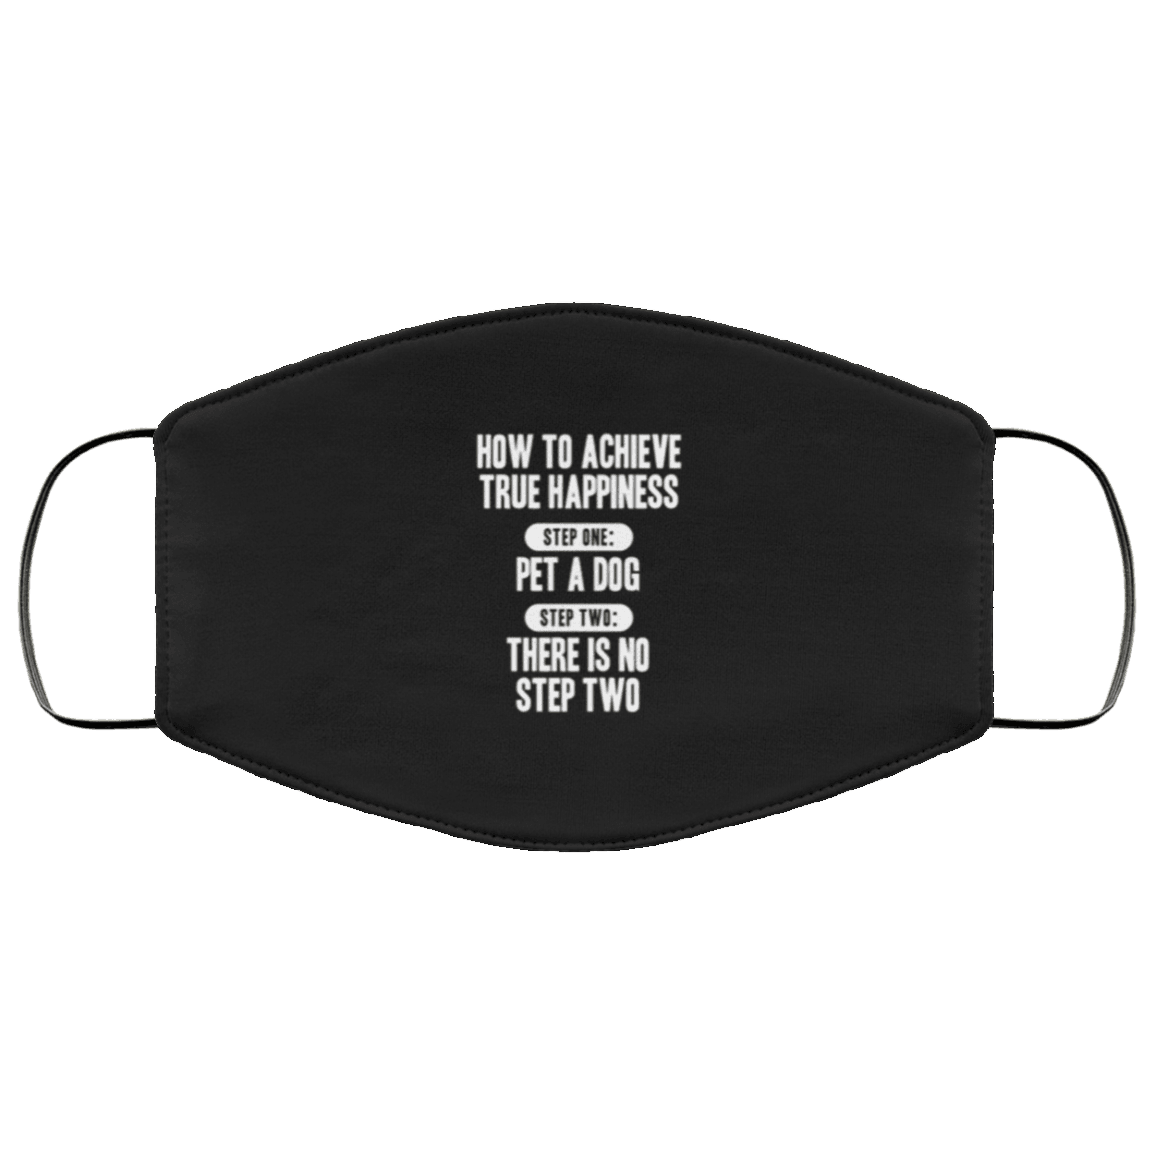 Designs by MyUtopia Shout Out:How To Achieve True Happiness: Pet A Dog Adult Fabric Face Mask with Elastic Ear Loops,3 Layer Fabric Face Mask / Black / Adult,Fabric Face Mask